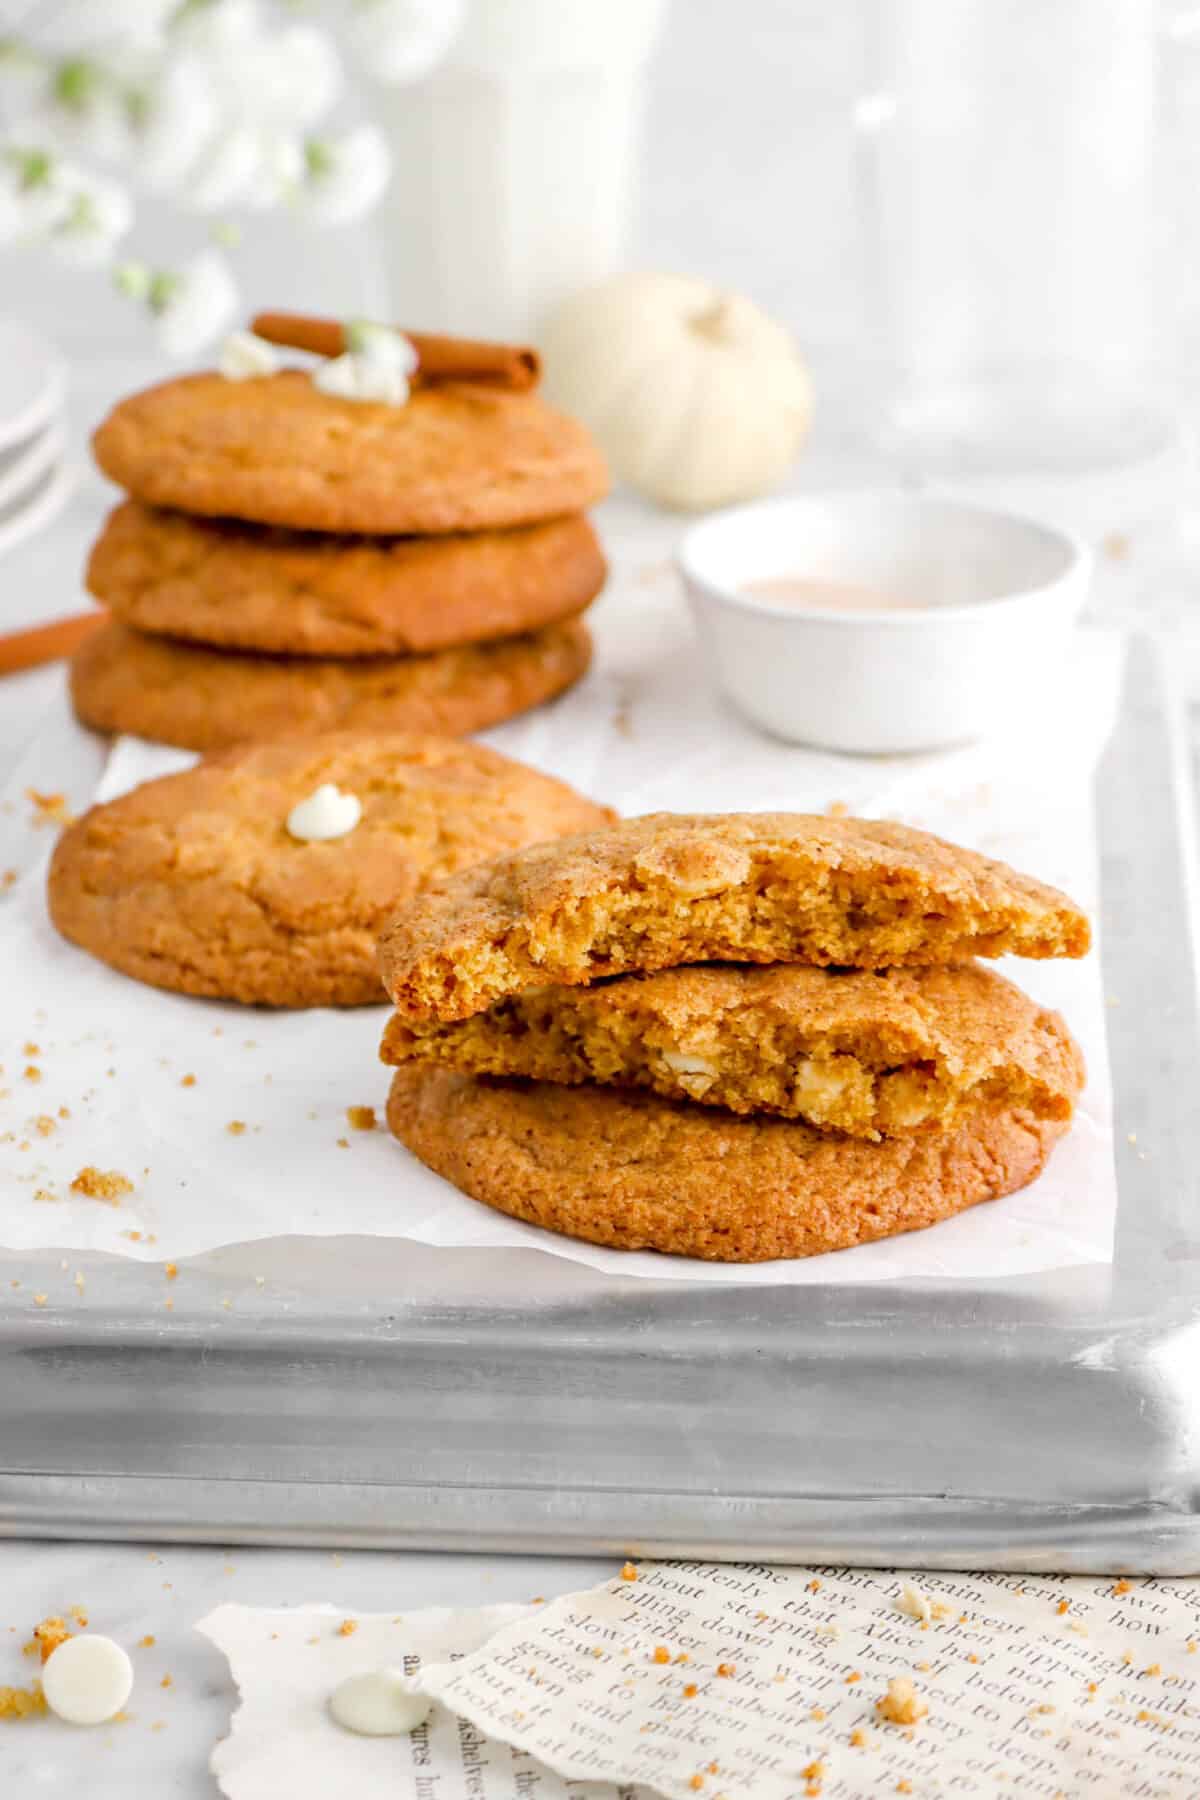 Pumpkin and White Chocolate Snickerdoodle Cookies